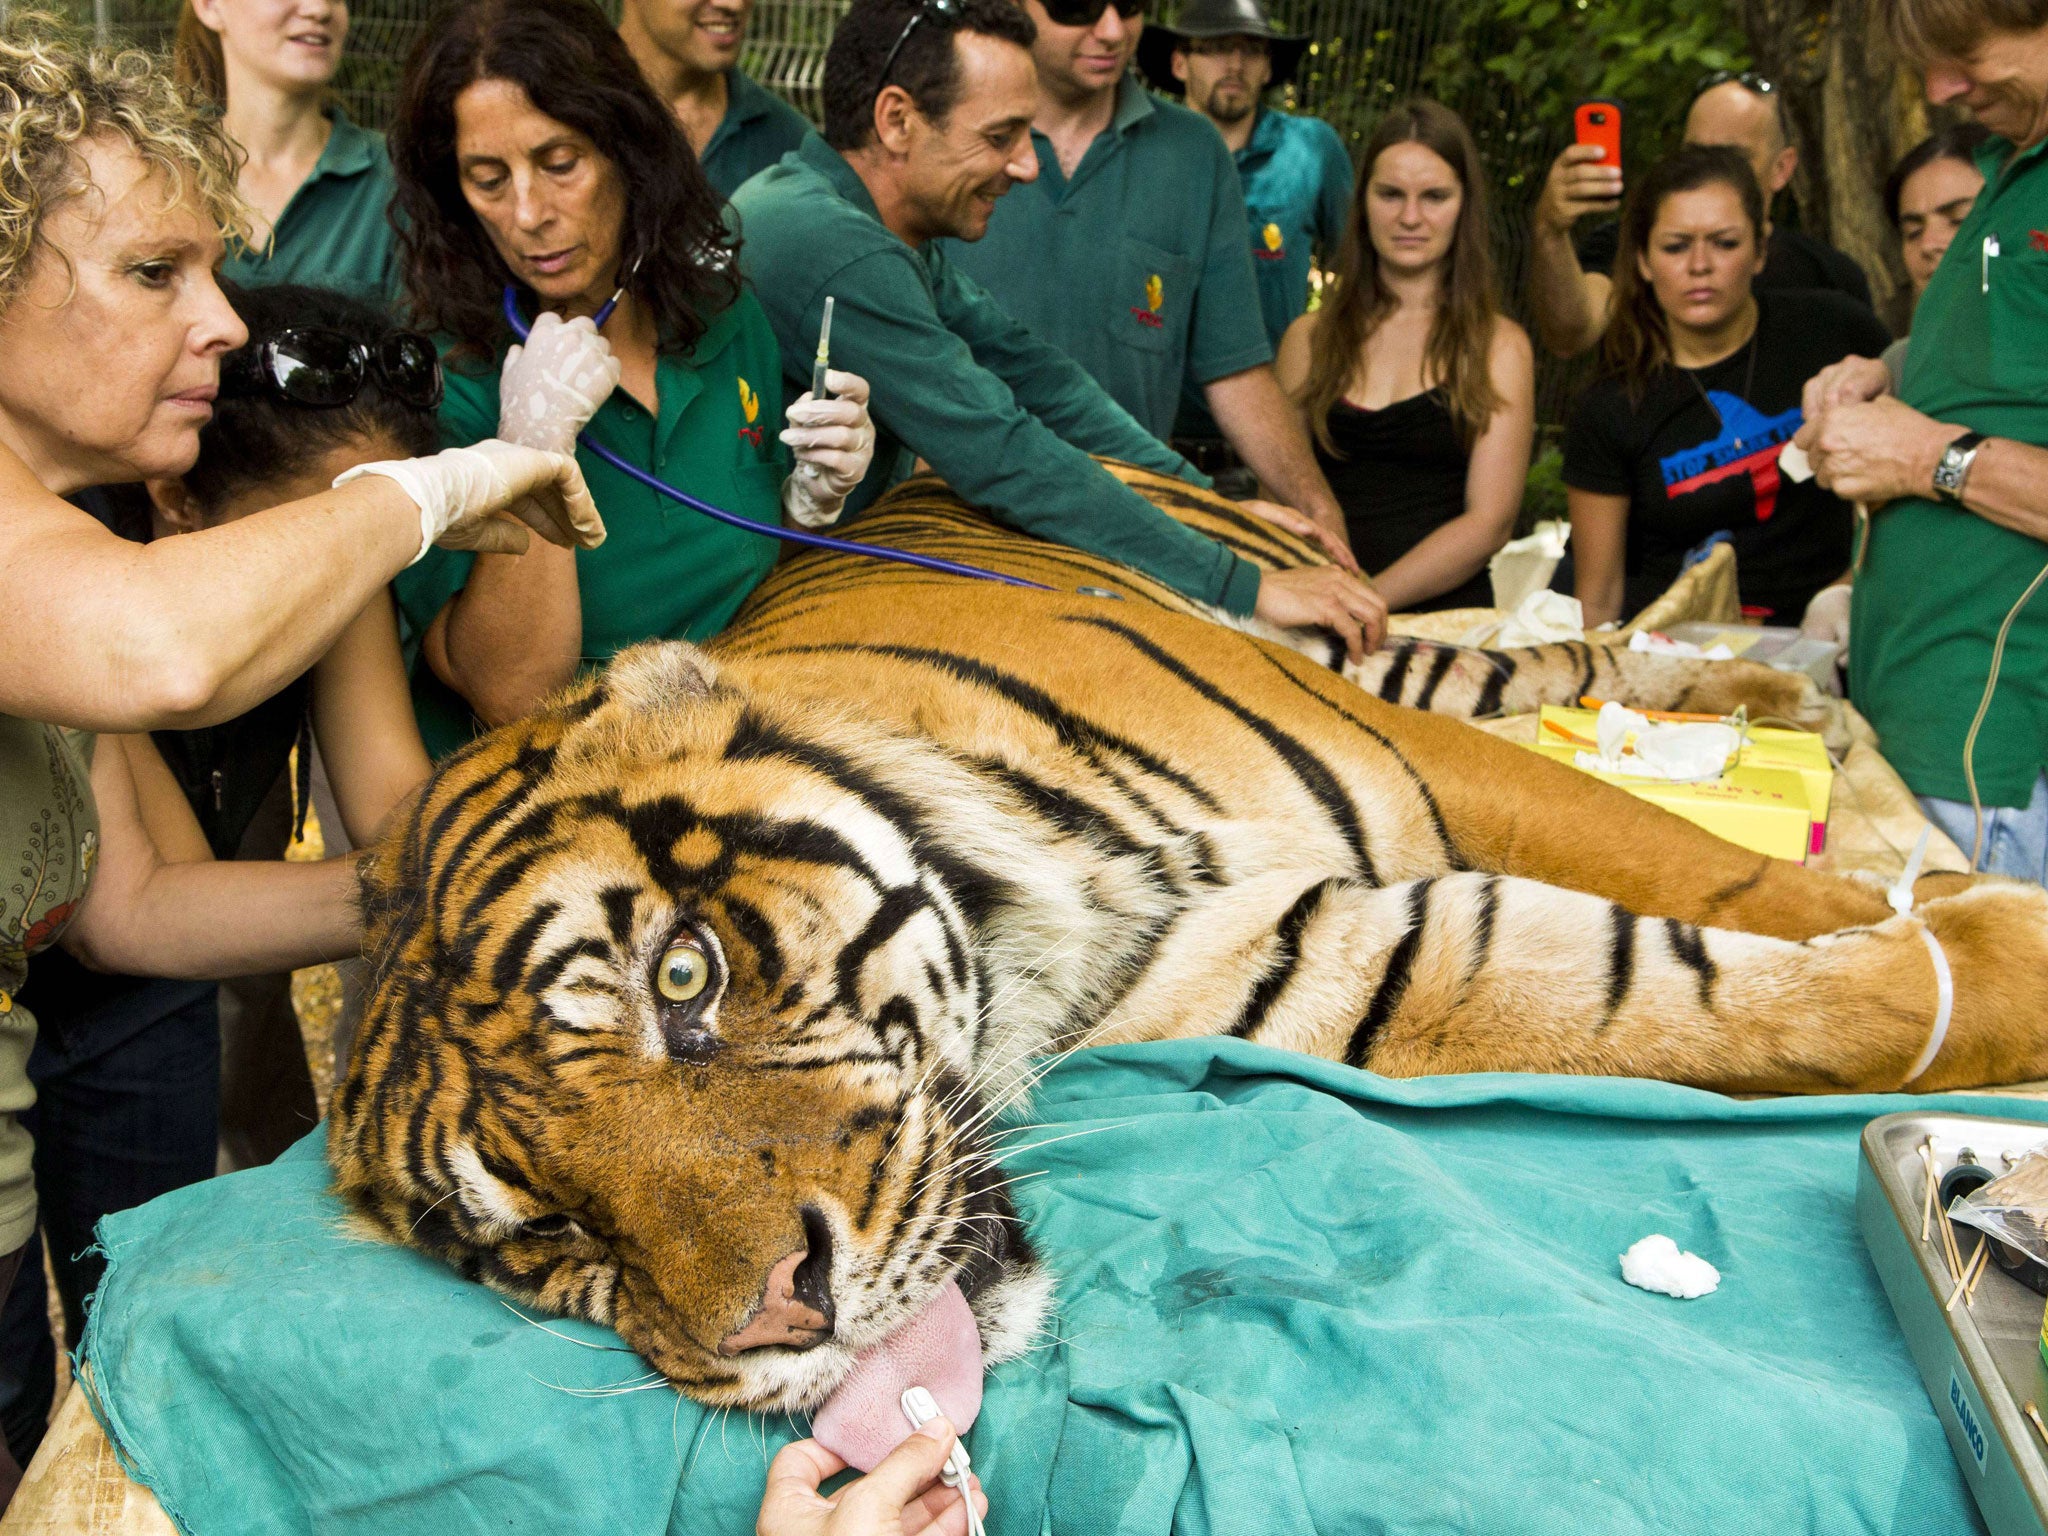 Pedang, a male Sumatran tiger, who is 14-years old and suffering from chronic ear infections, is given acupuncture treatment at the Ramat Gan Safari, an open-air zoo near Tel Aviv